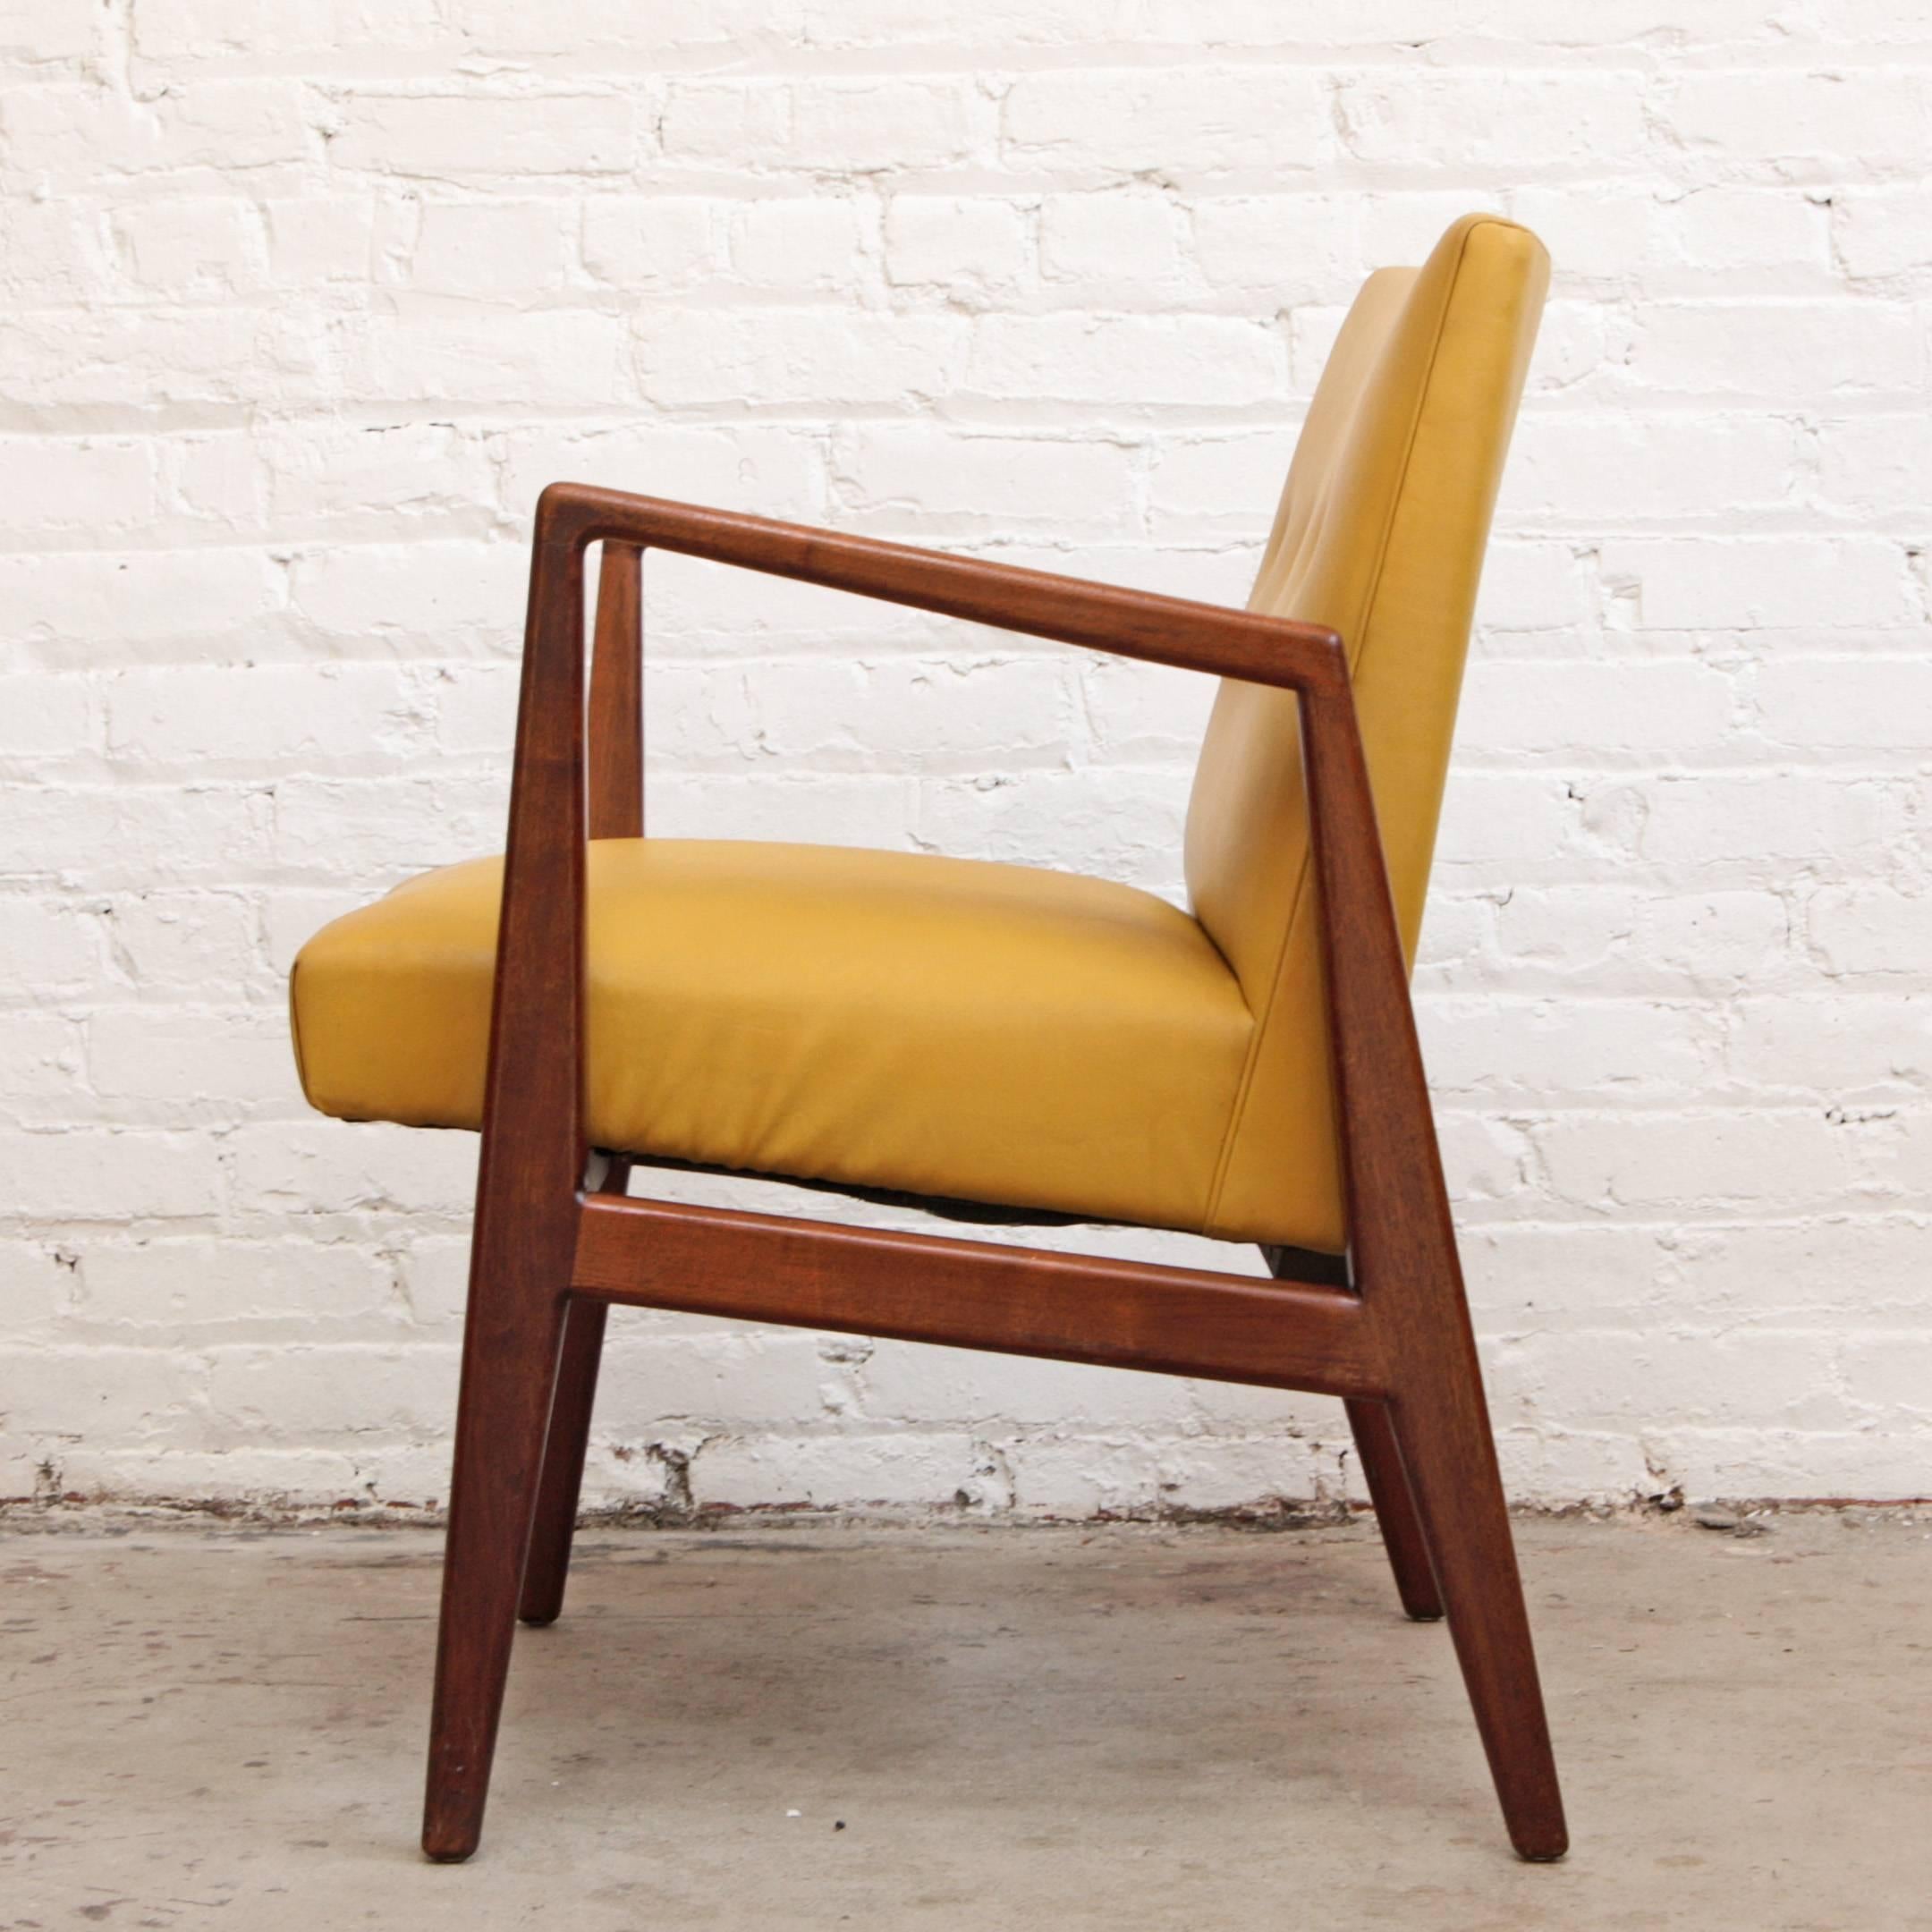 Lounge chair or armchair by Jens Risom. Solid walnut sculpted frame with mustard yellow vinyl upholstery. Compact design with great lines!